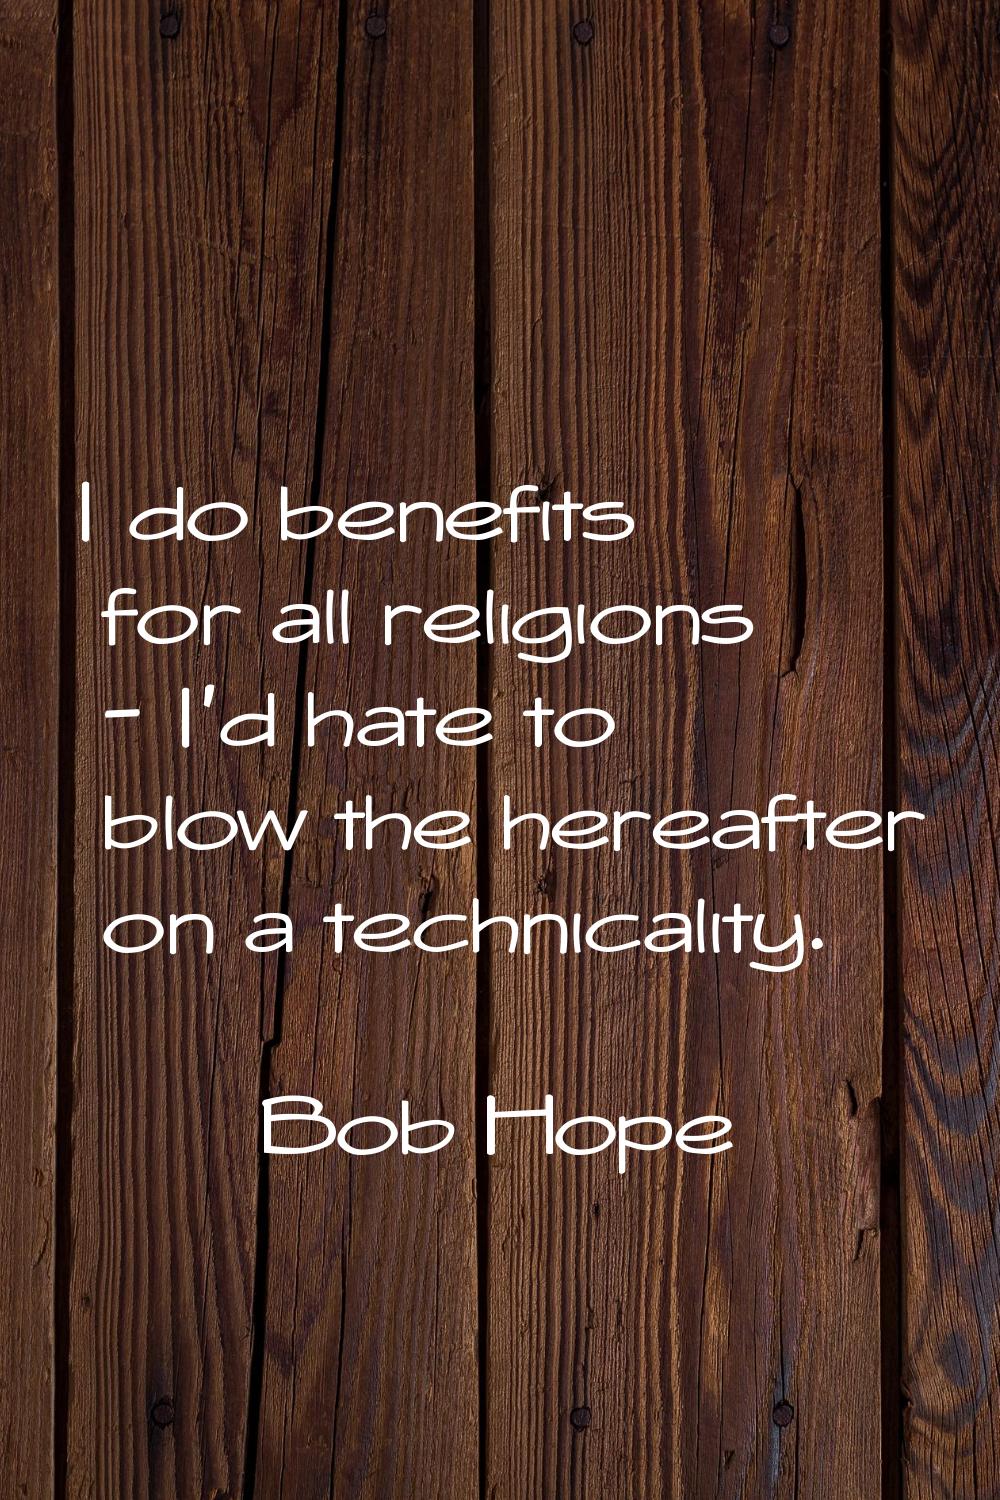 I do benefits for all religions - I'd hate to blow the hereafter on a technicality.